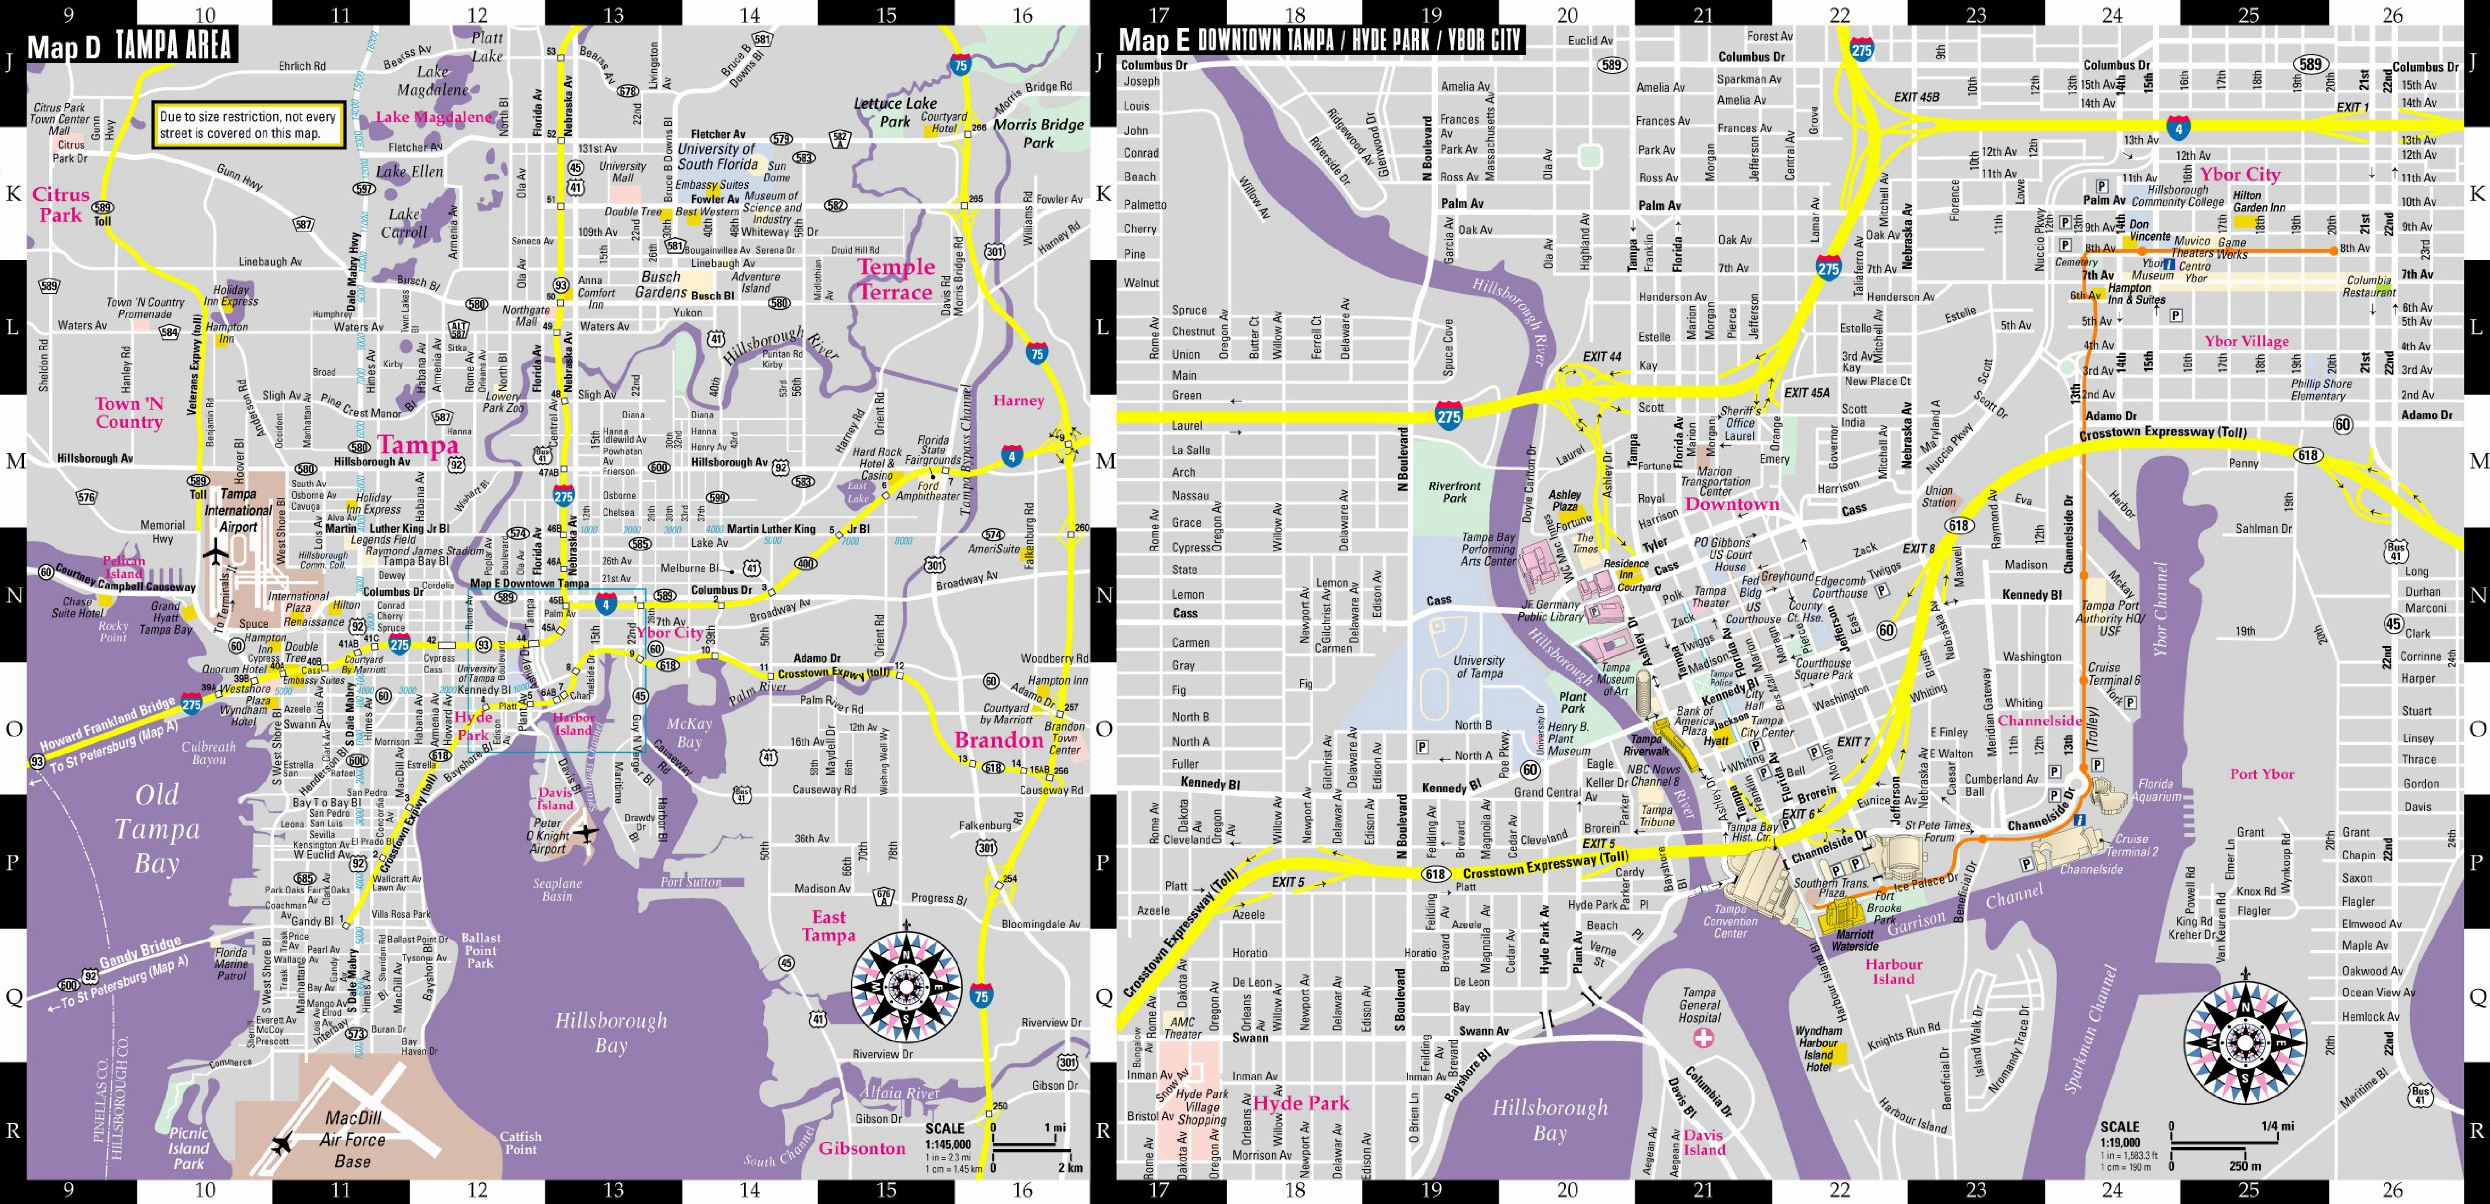 Large Tampa Maps For Free Download And Print | High-Resolution And - Street Map Of Tampa Florida